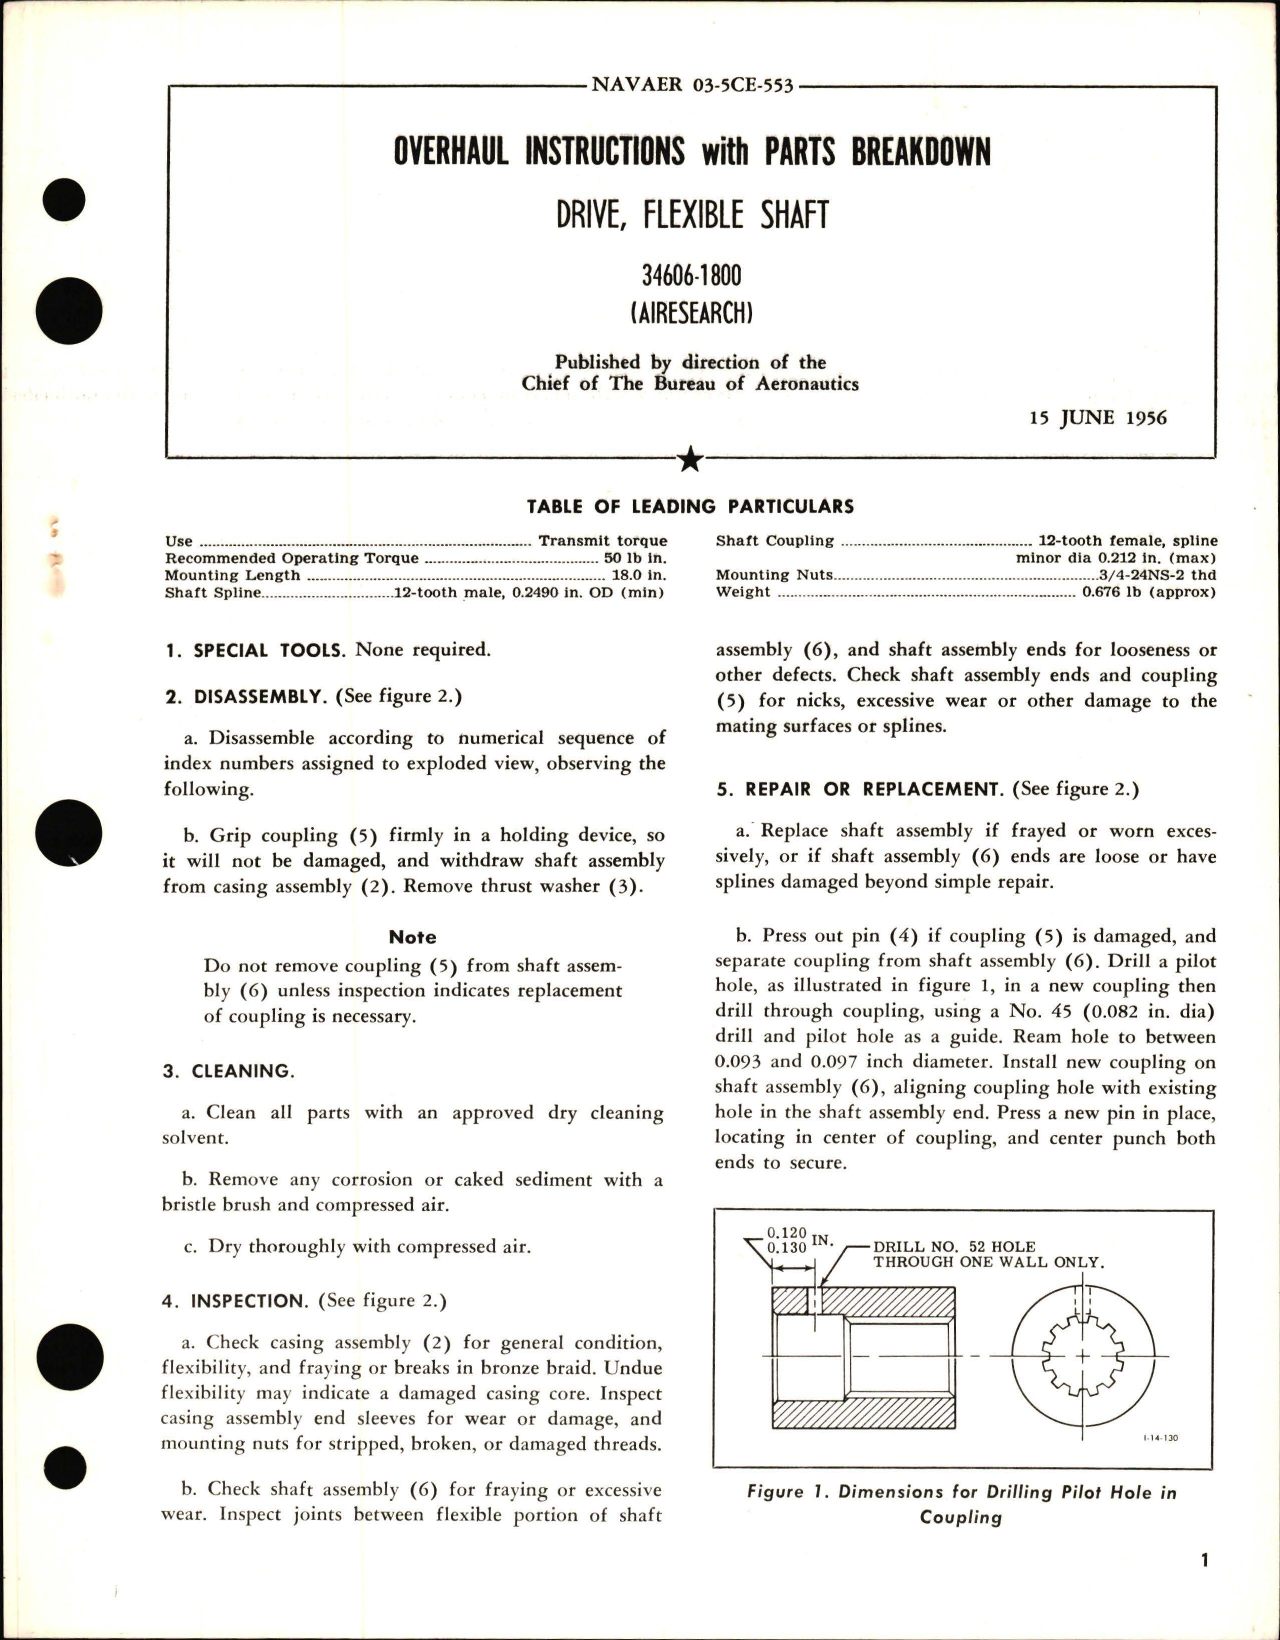 Sample page 1 from AirCorps Library document: Overhaul Instructions with Parts Breakdown for Drive, Flexible Shaft 34606-1800